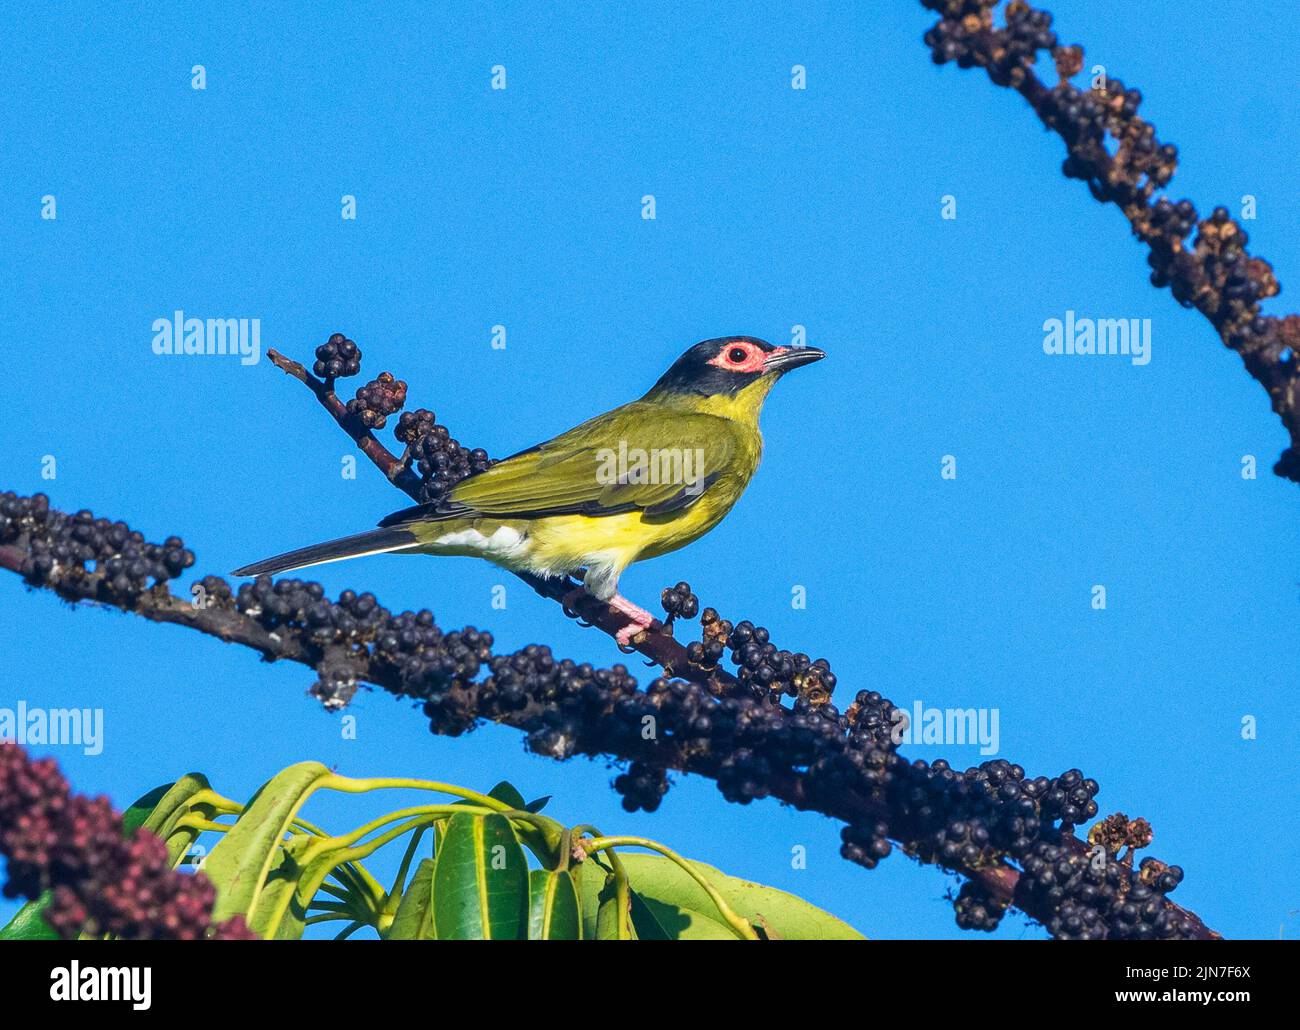 Male Figbird (Sphecotheres flaviventris) perched on a bush with berries, Mungulla Station, Queensland, QLD, Australia Stock Photo